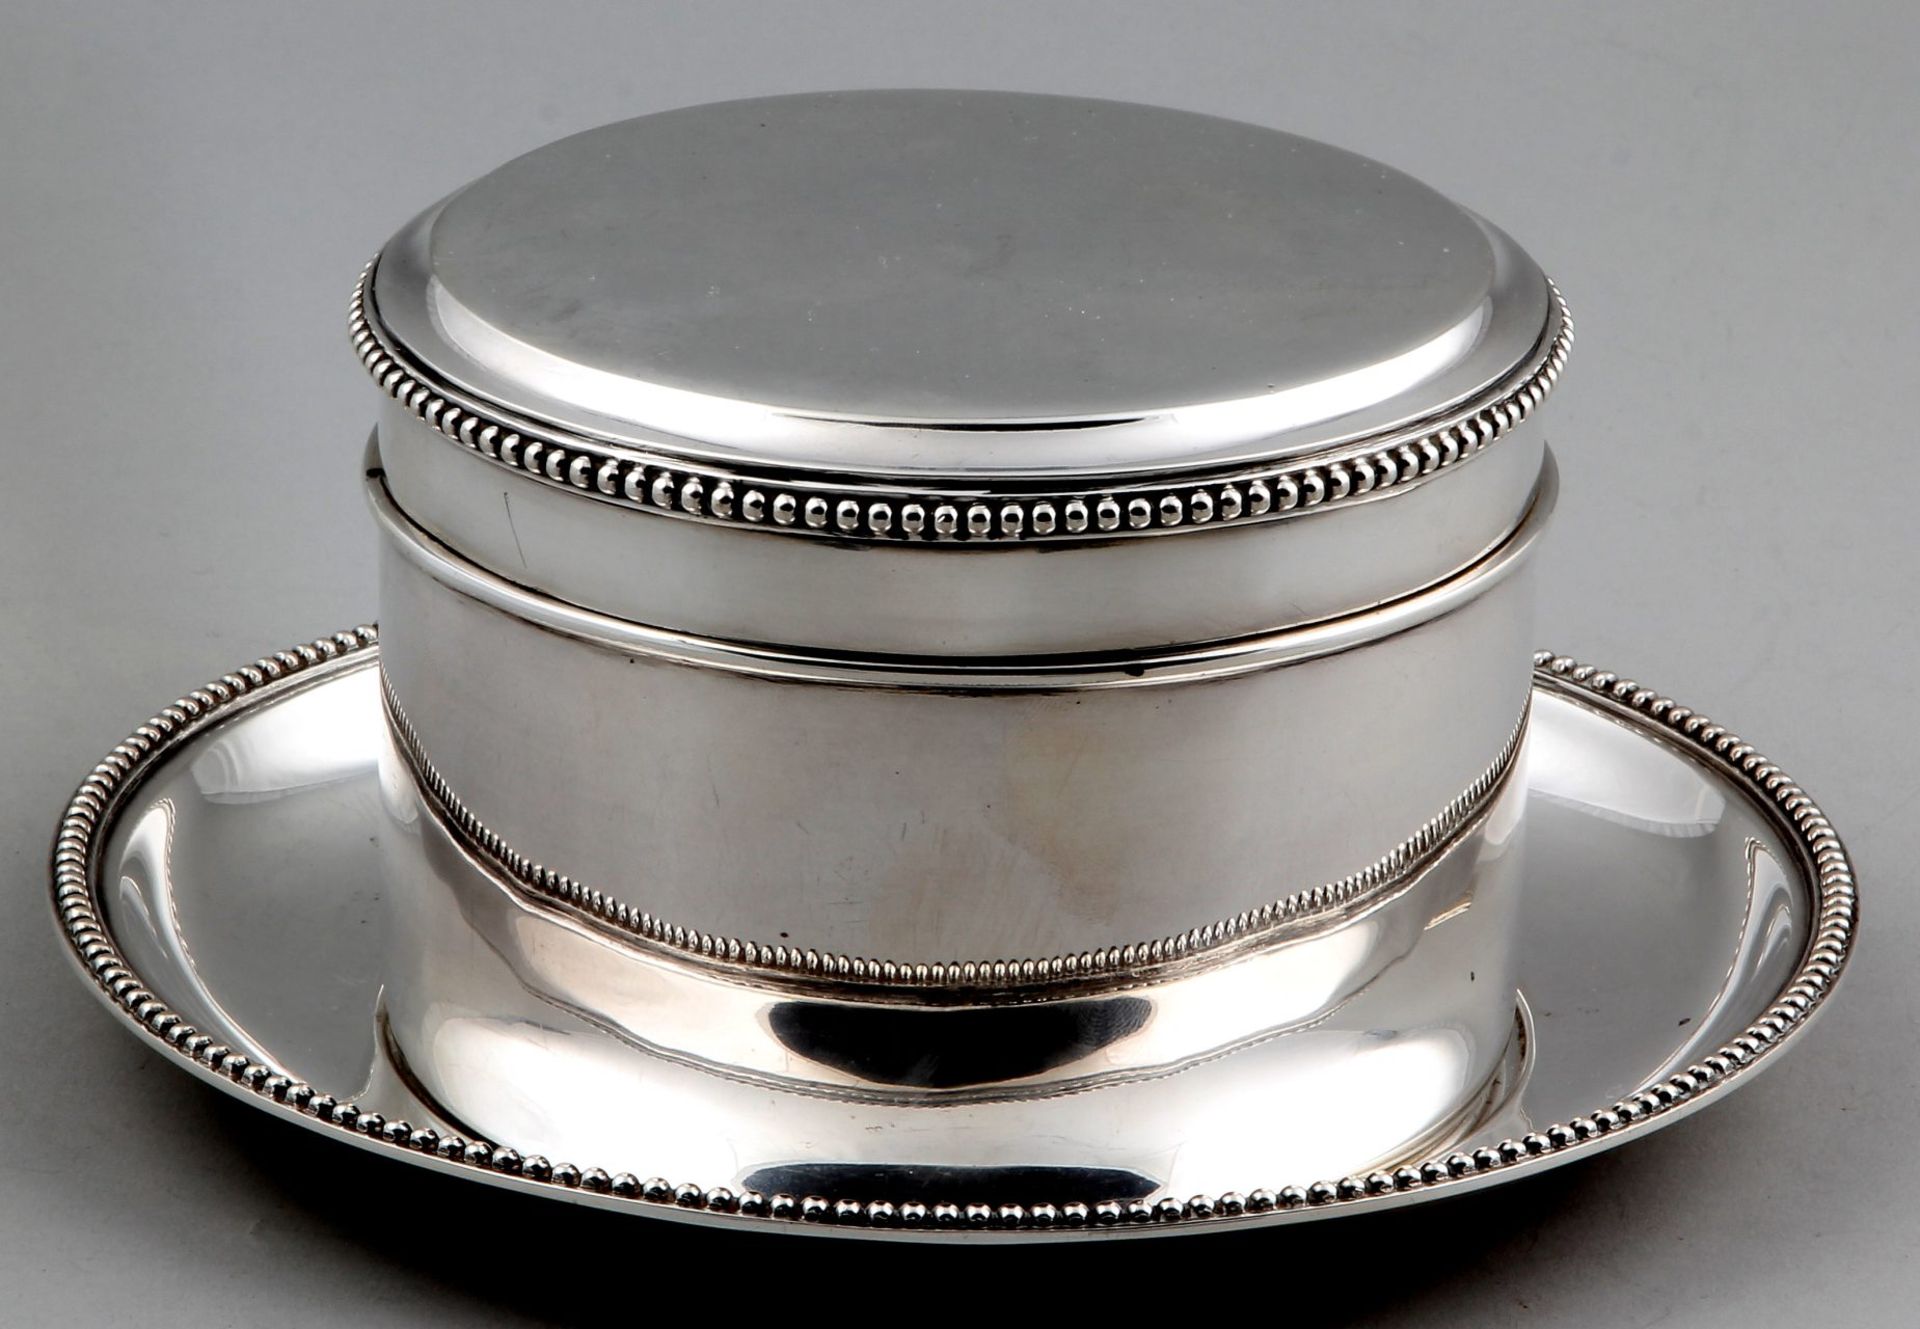 Silver biscuit tin on silver platter, 835/000. Round cookie jar decorated with pearl rim mounted